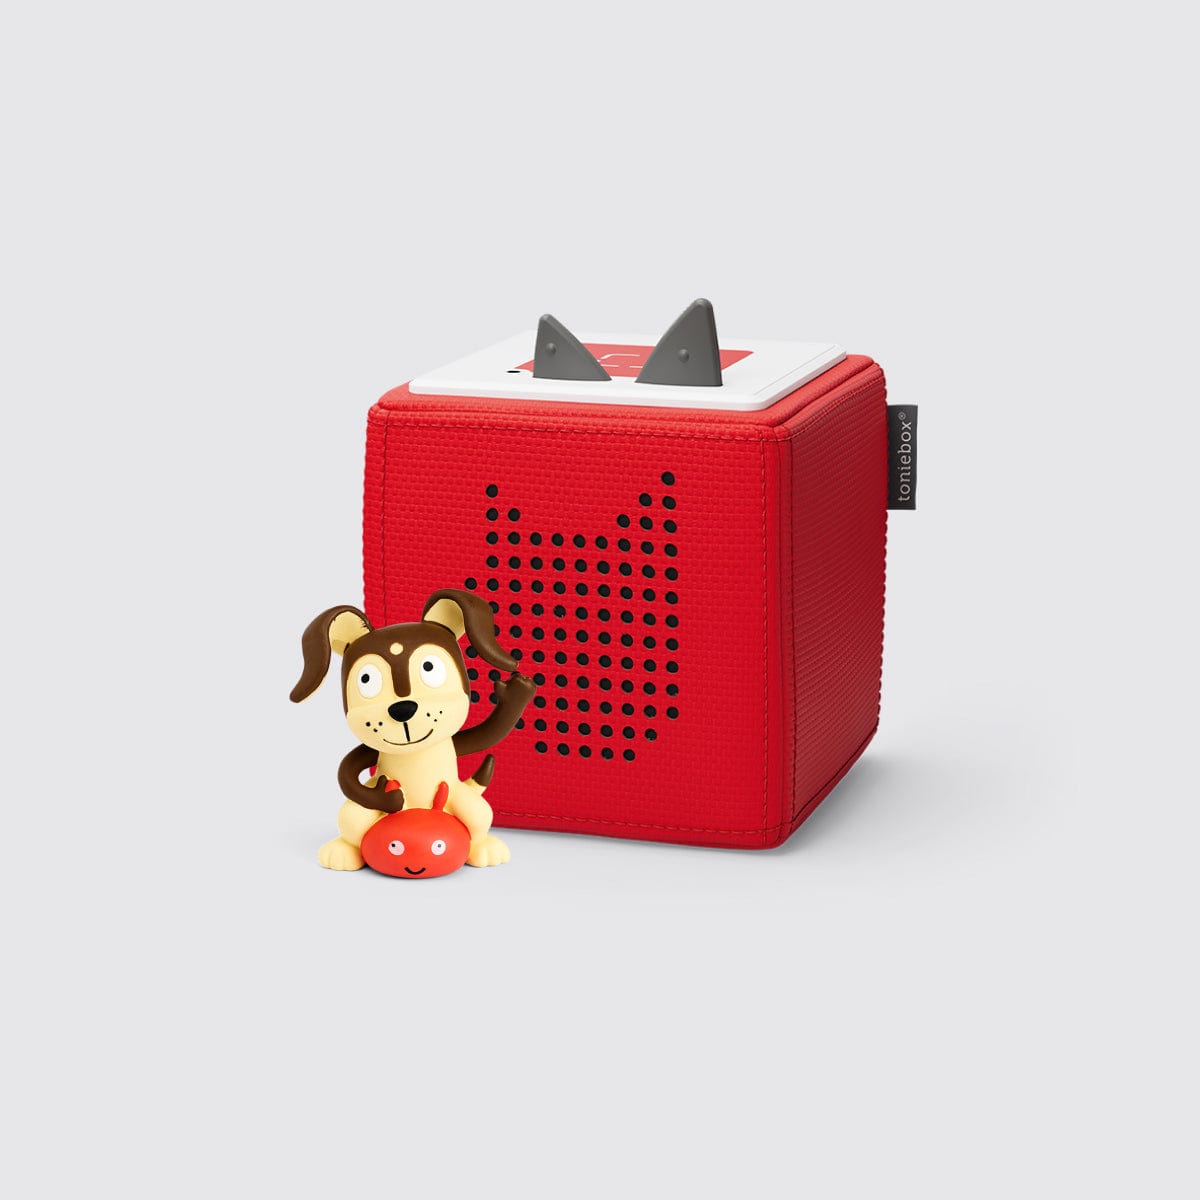 tonies® I Red Playtime Puppy Toniebox I Buy now